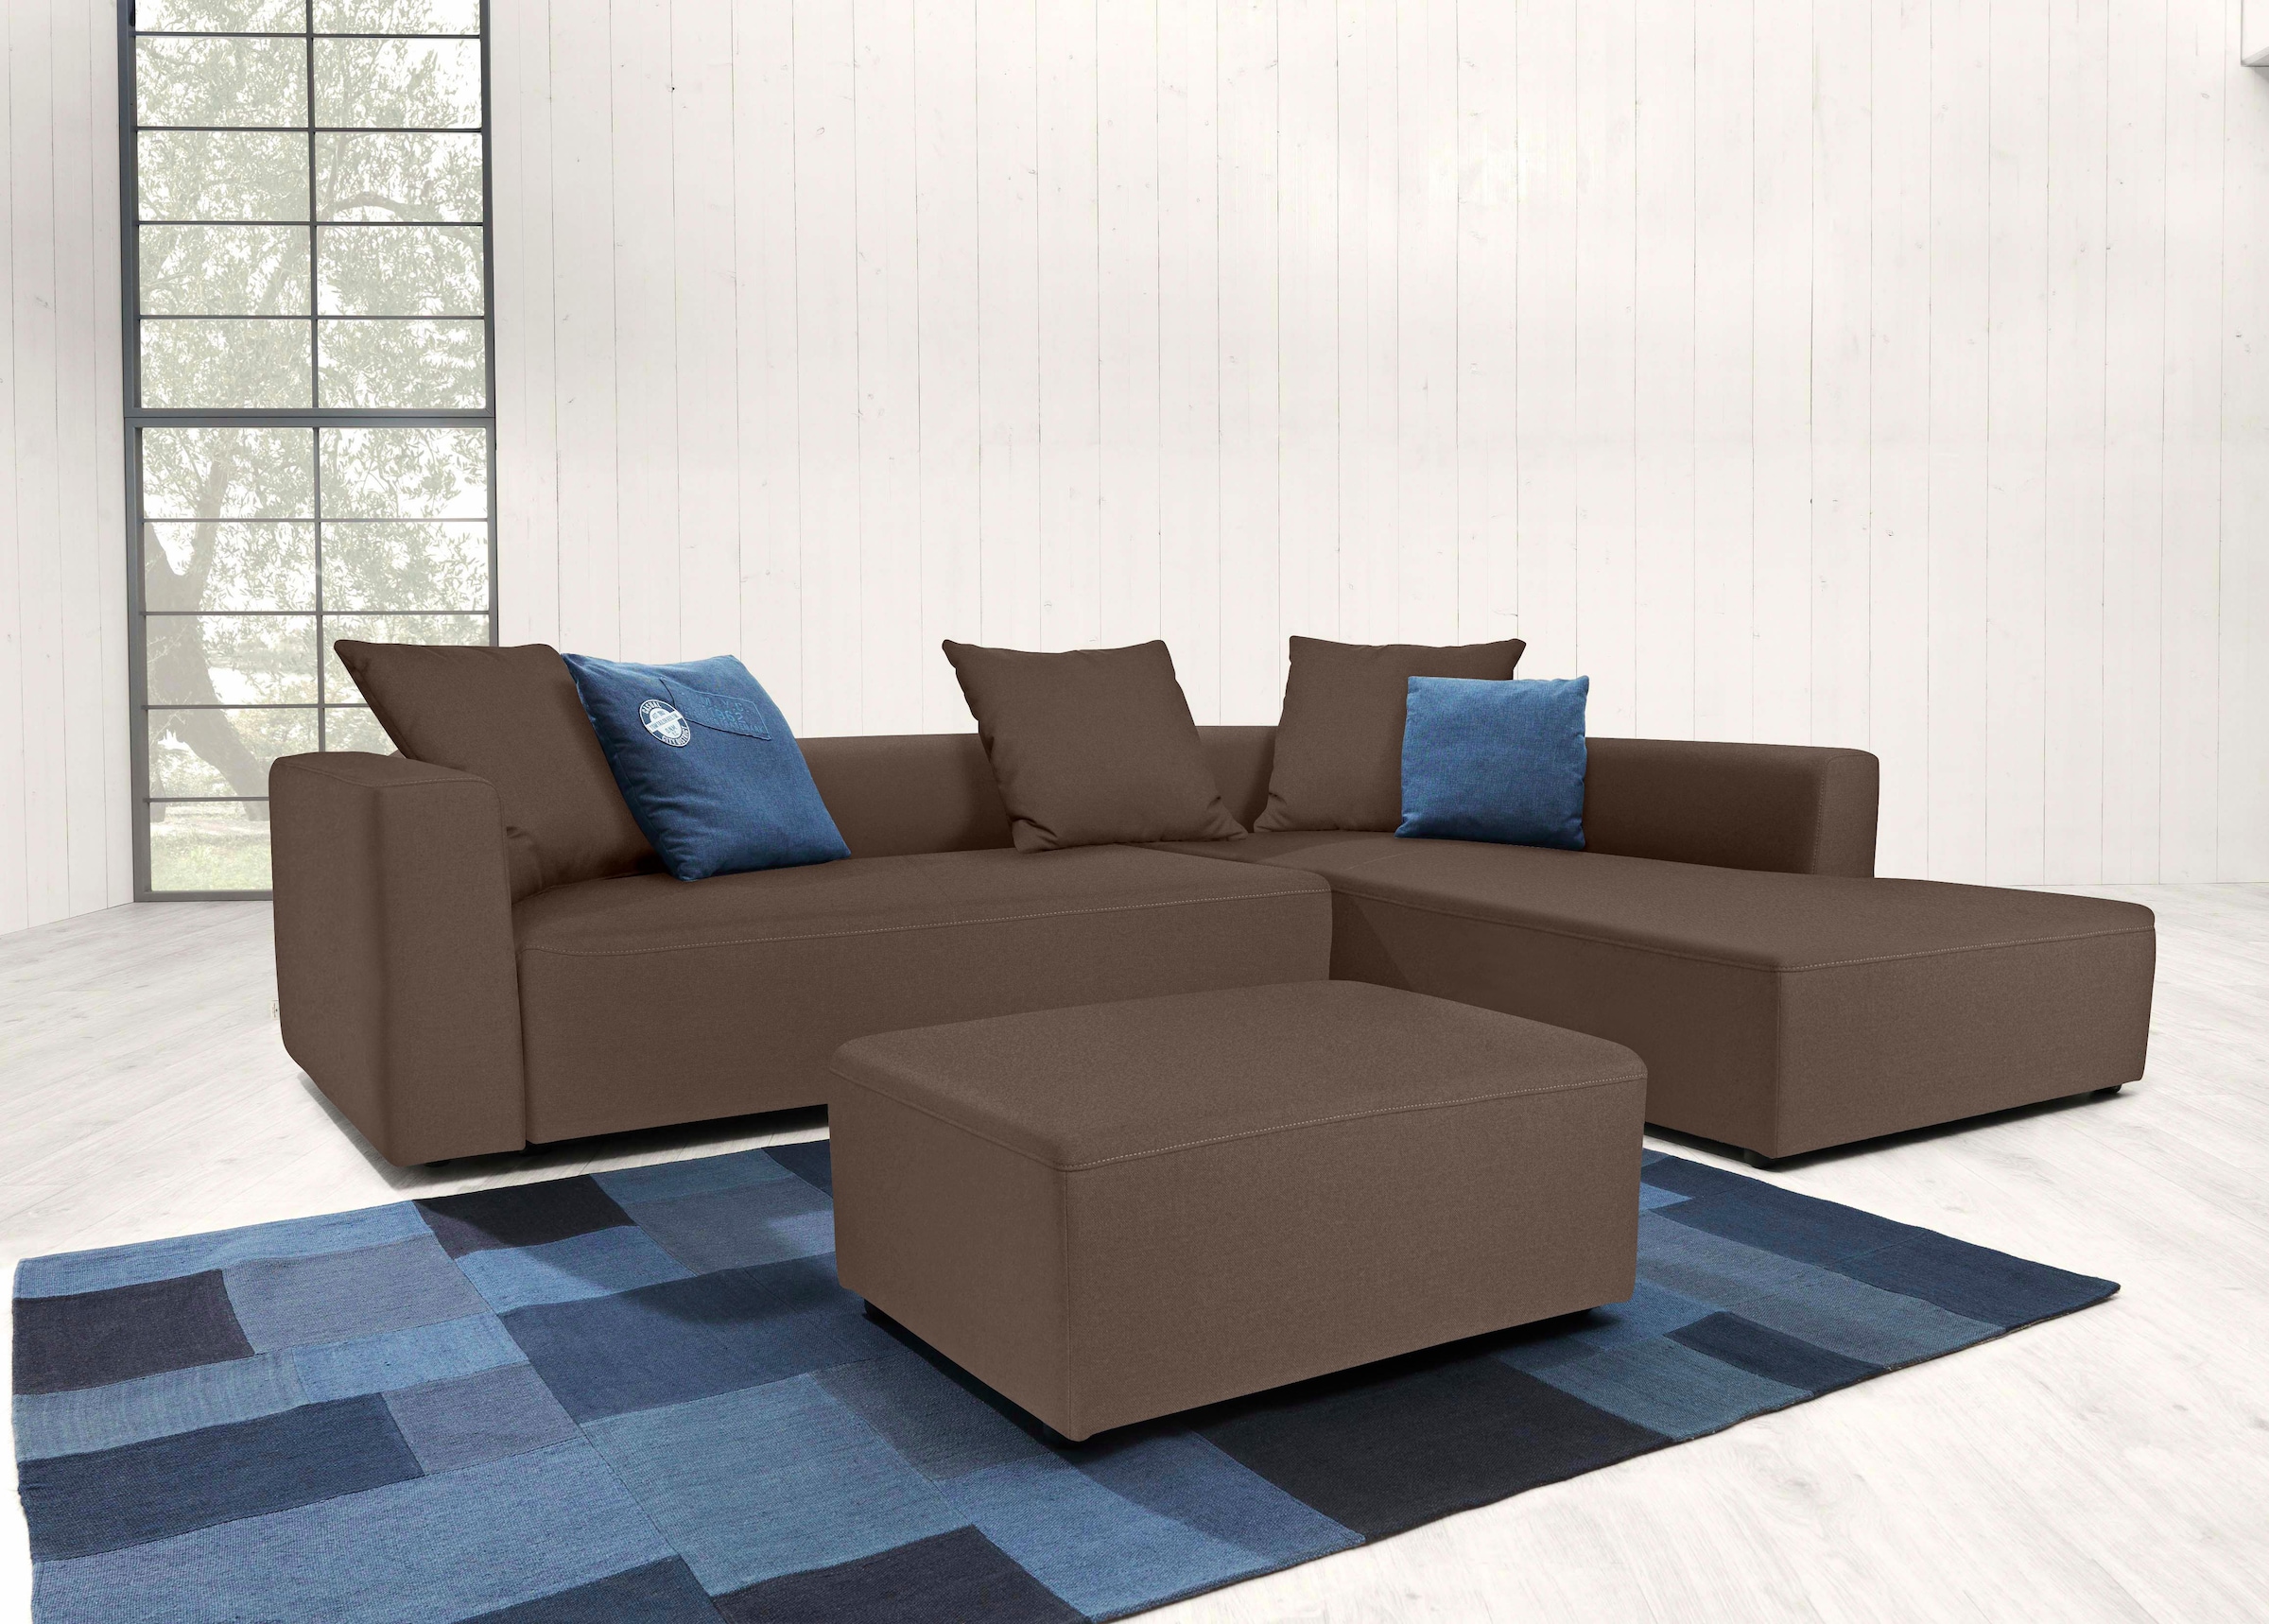 TOM TAILOR HOME Hockerbank »HEAVEN CASUAL/STYLE«, aus der COLORS COLLECTION, Breite 109 cm